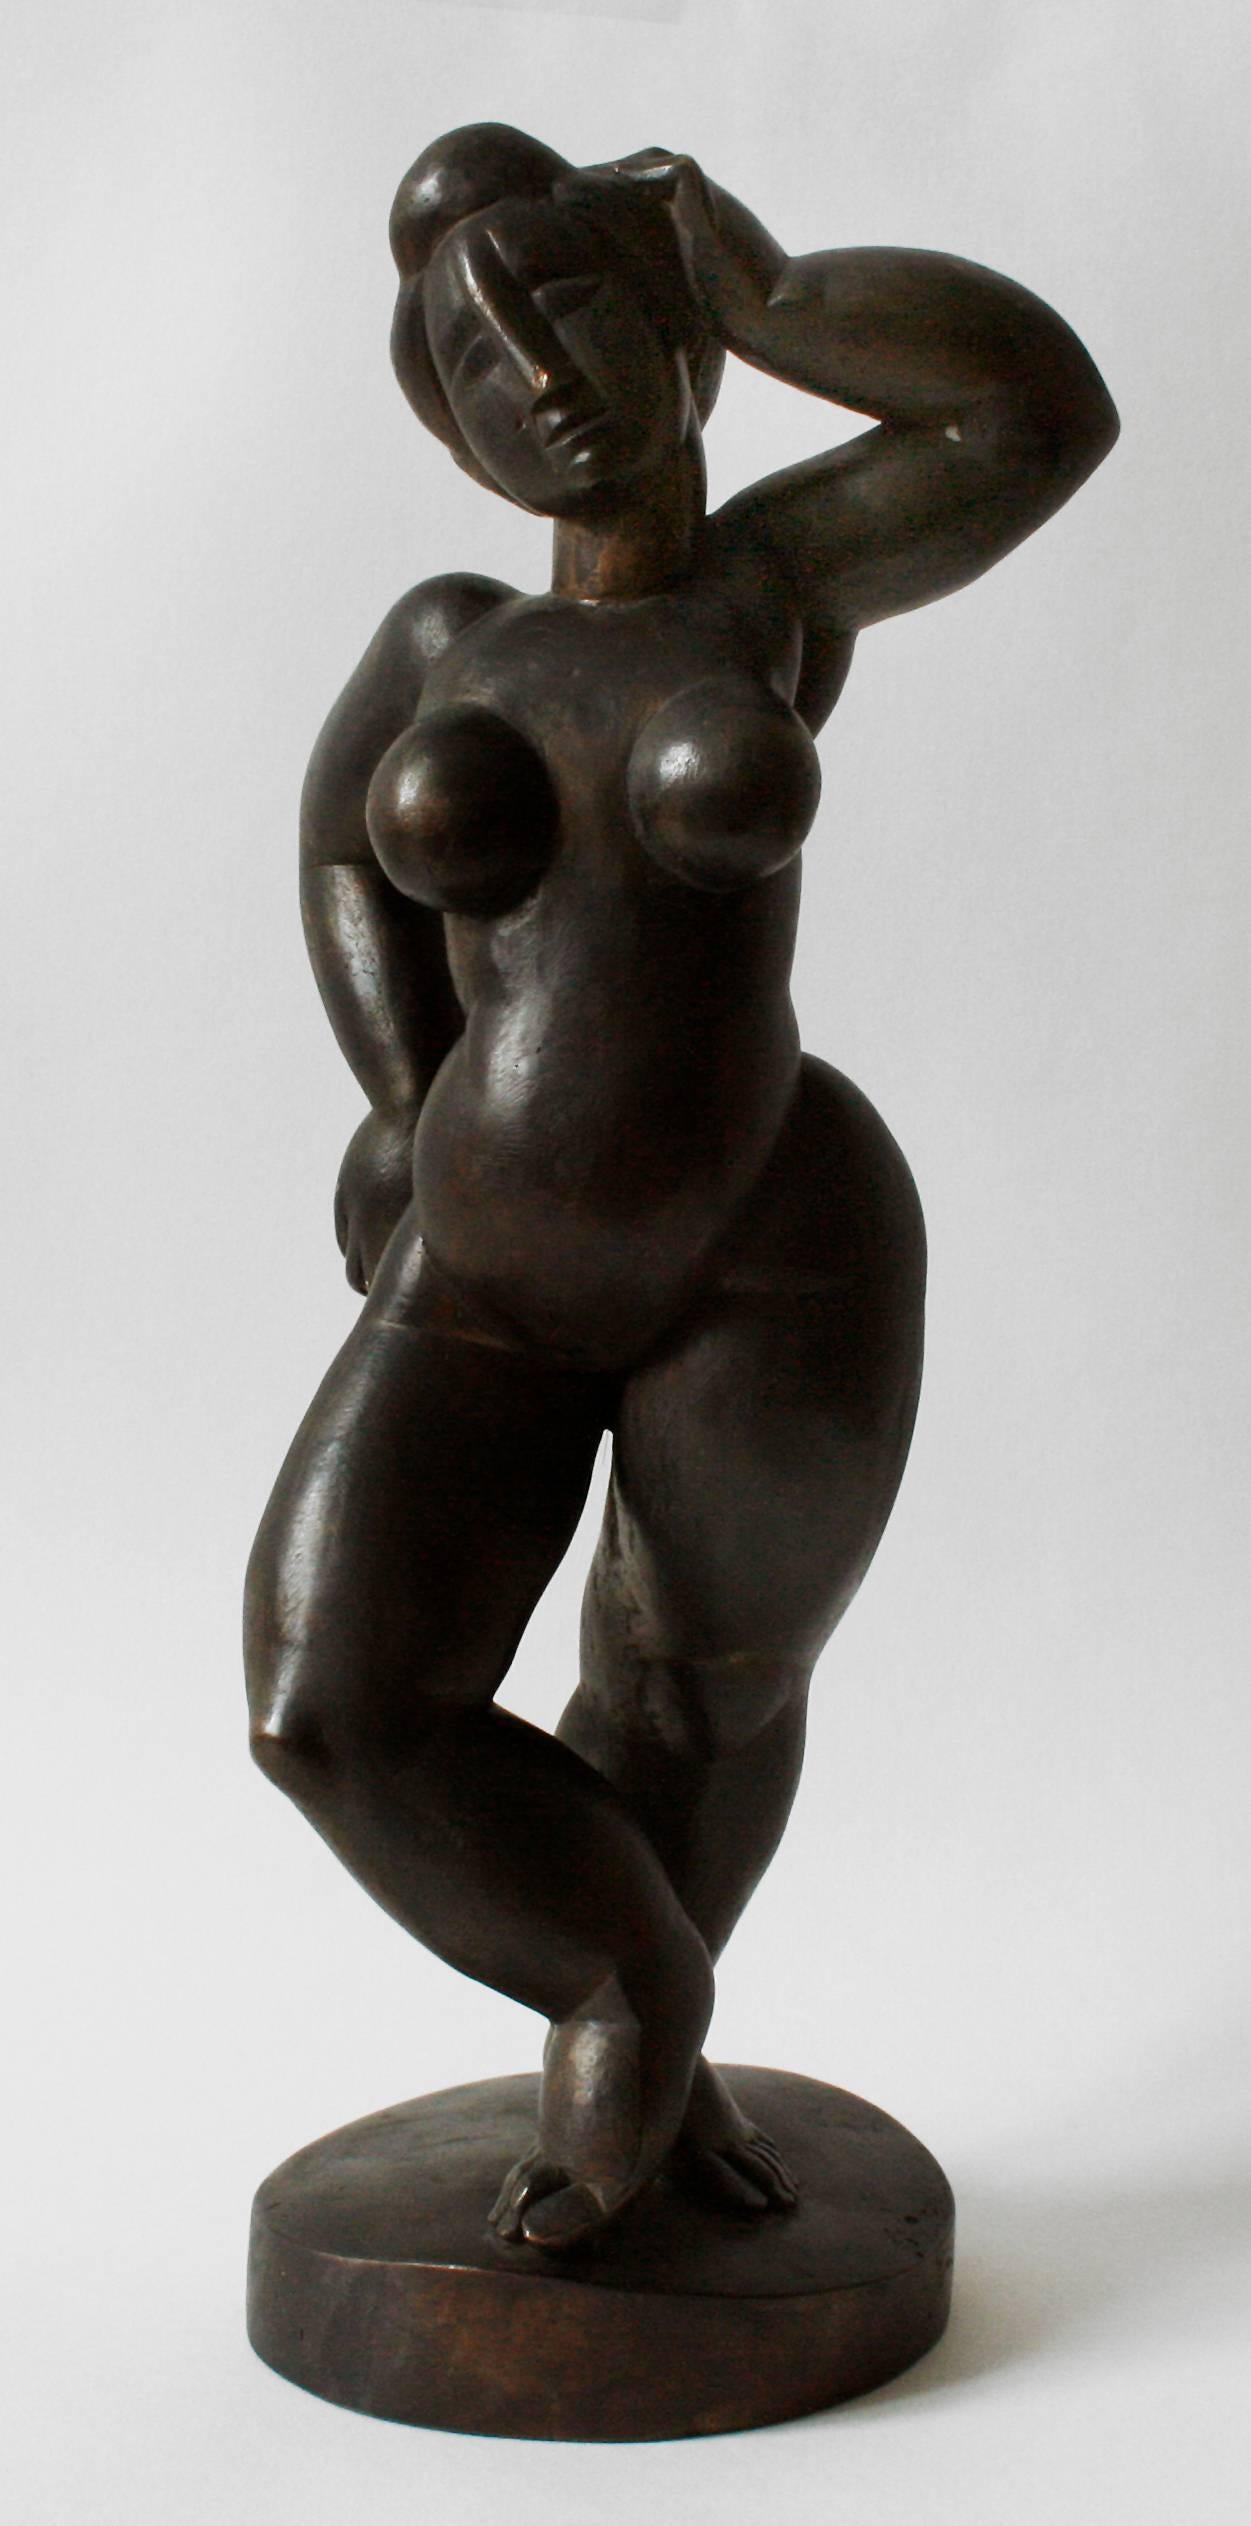 Giovanni Rindler Nude Sculpture - Standing Female Nude - Bronze, Post-Modern, Archaic, Round Forms, 2001, 